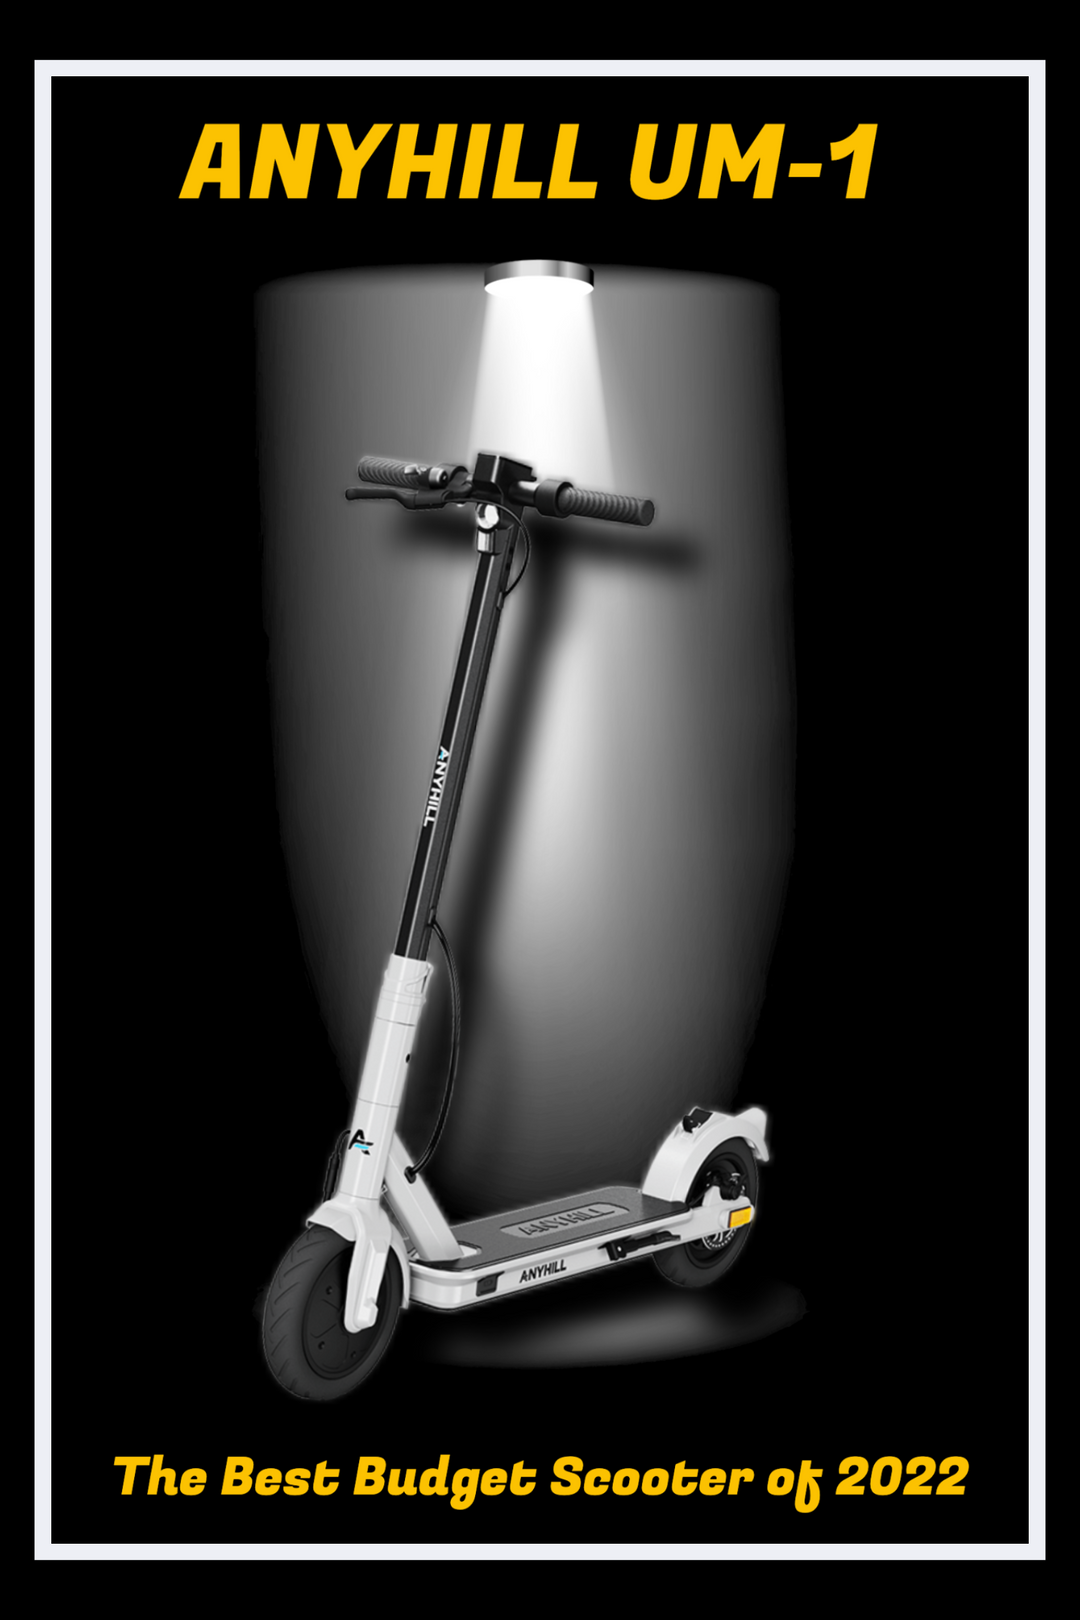 ANYHILL UM-1 – The Best Budget Scooter of 2022